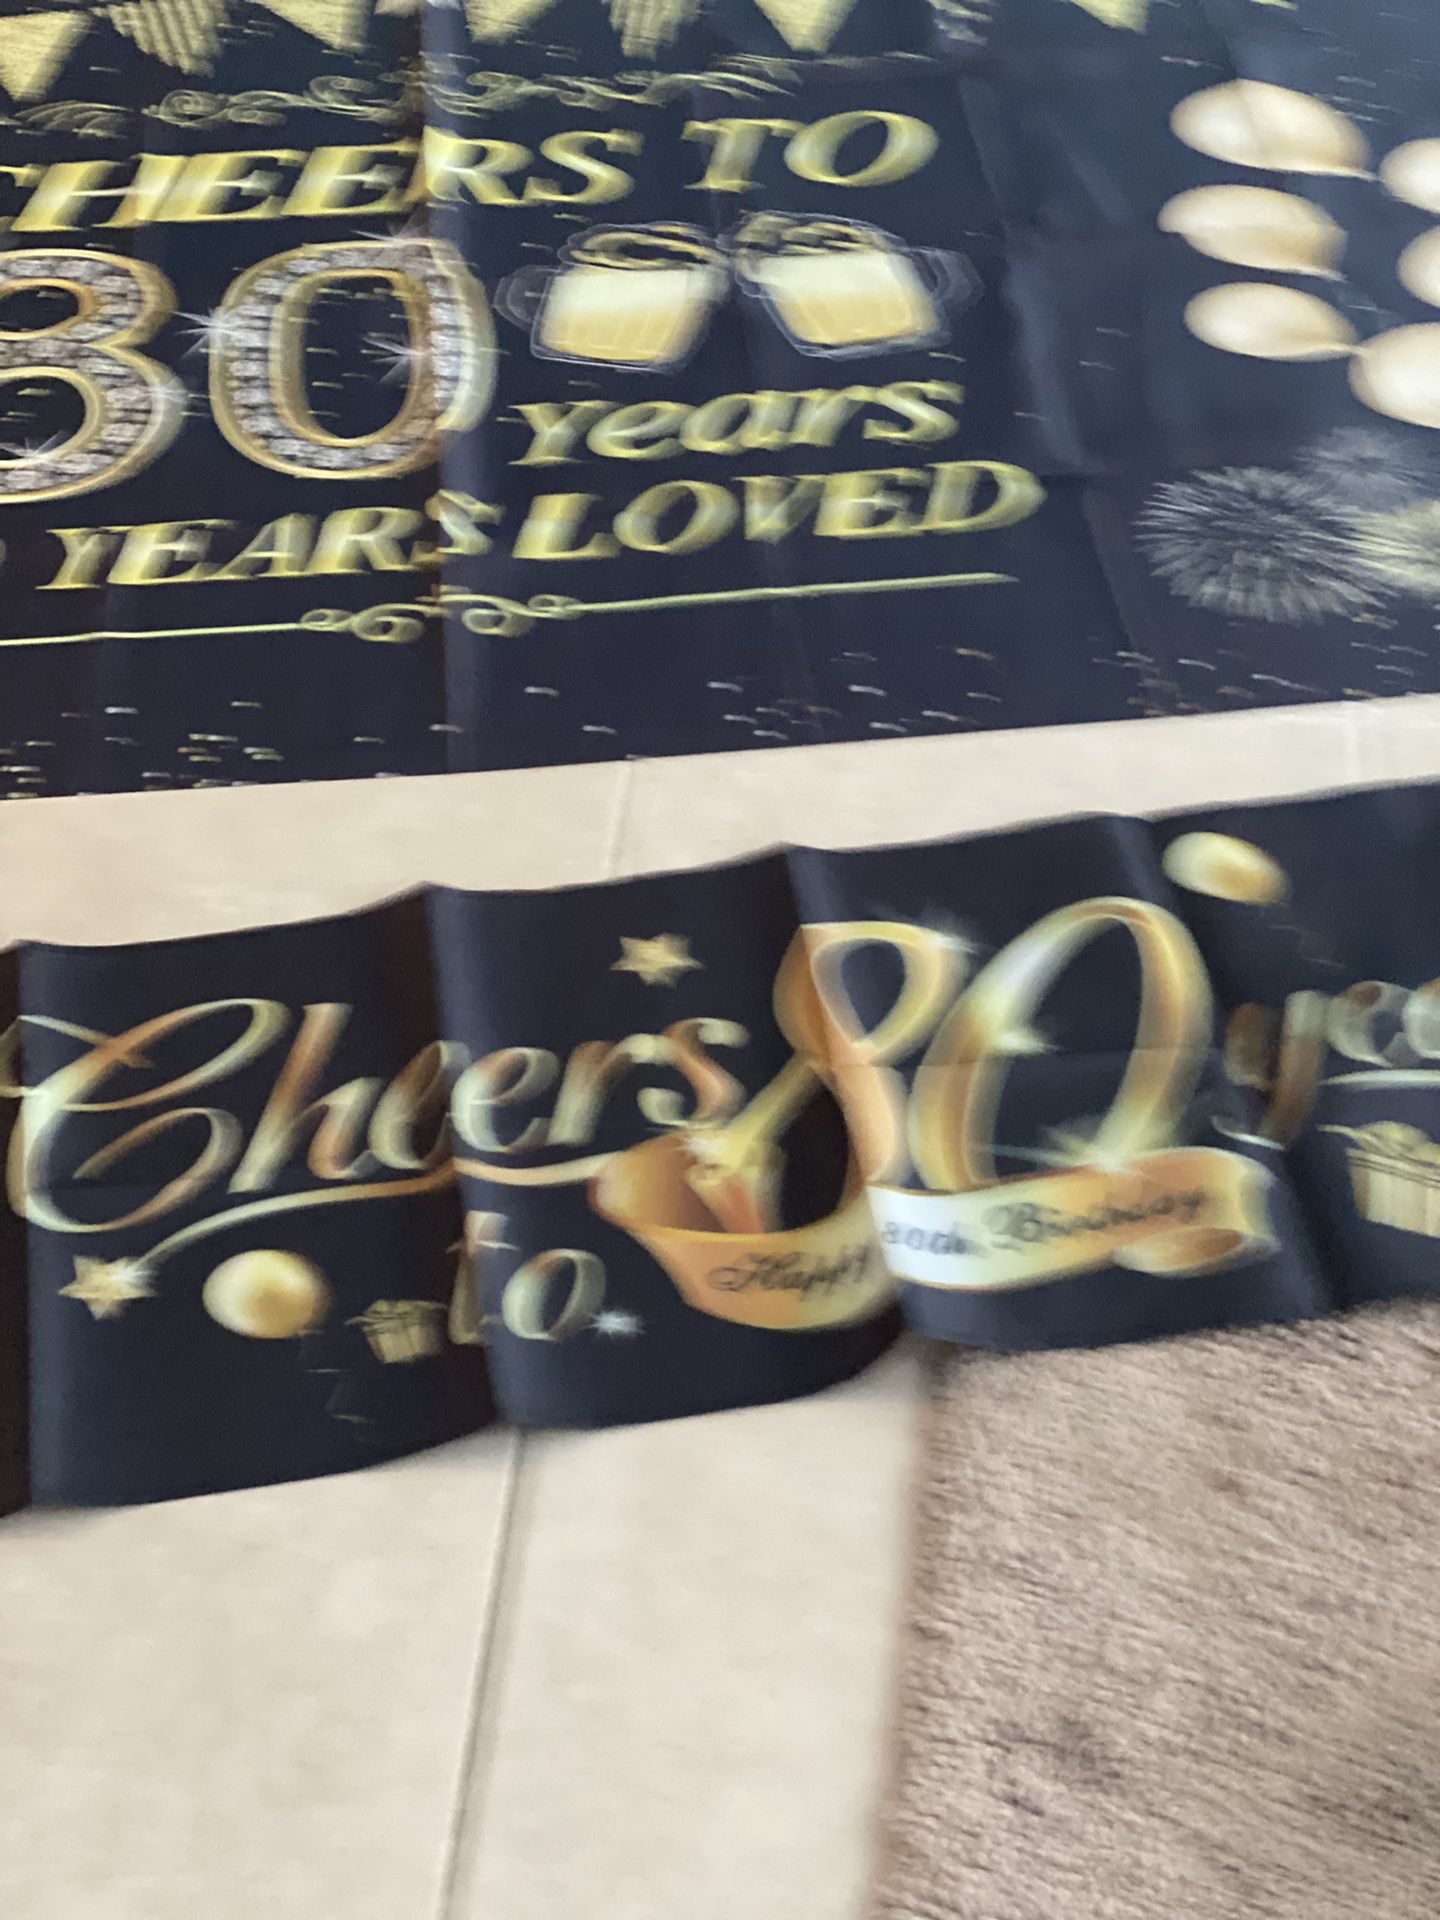 80th Birthday Banners